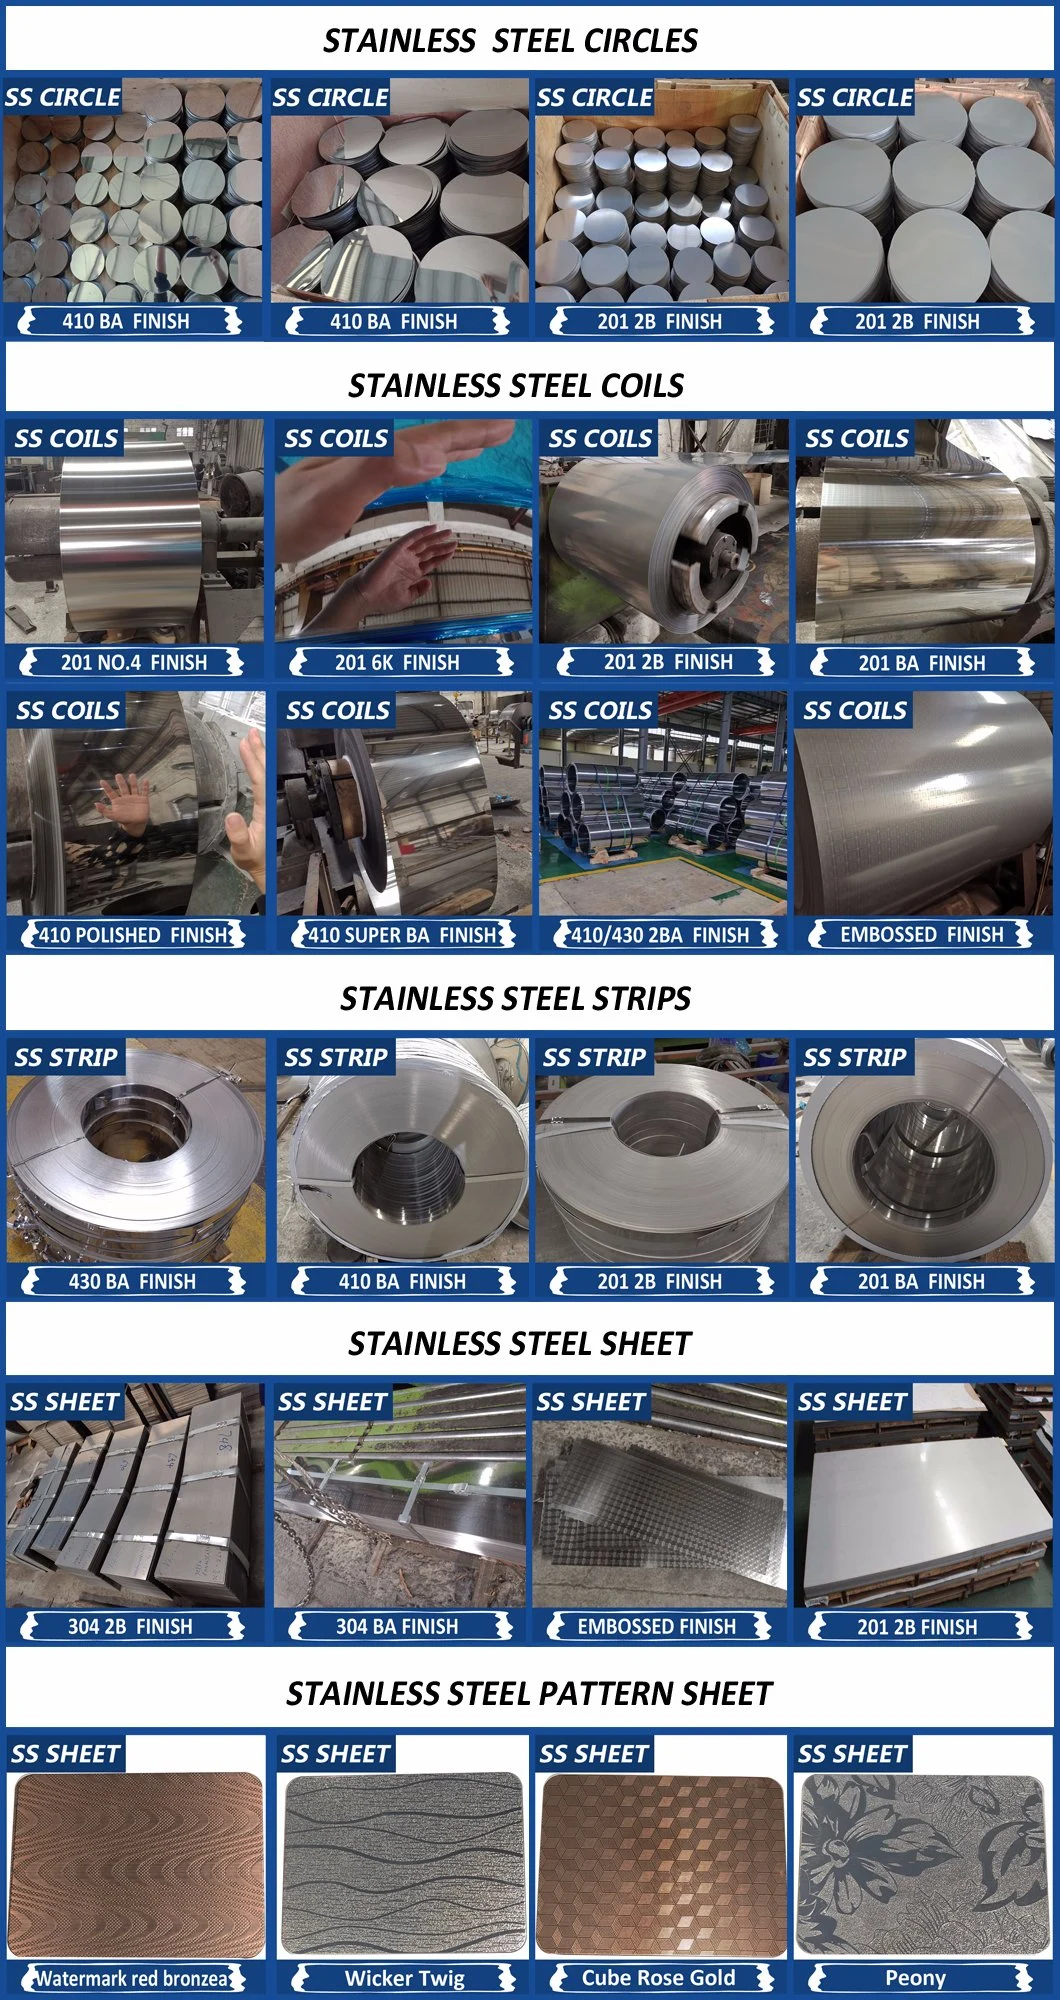 Stainless Steel Material Circle Sheet for Stainless Steel Cookware Product